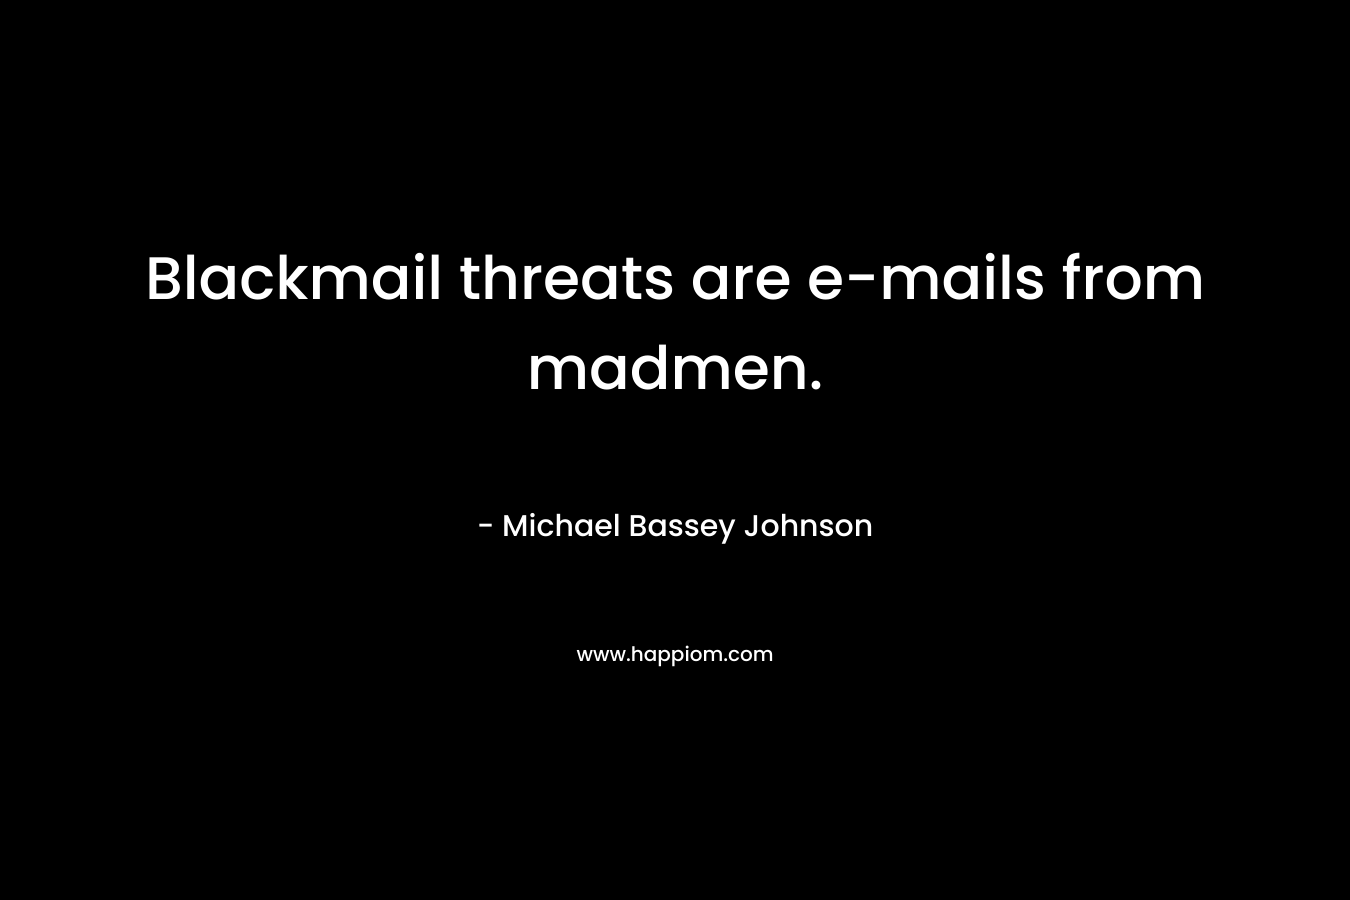 Blackmail threats are e-mails from madmen. – Michael Bassey Johnson